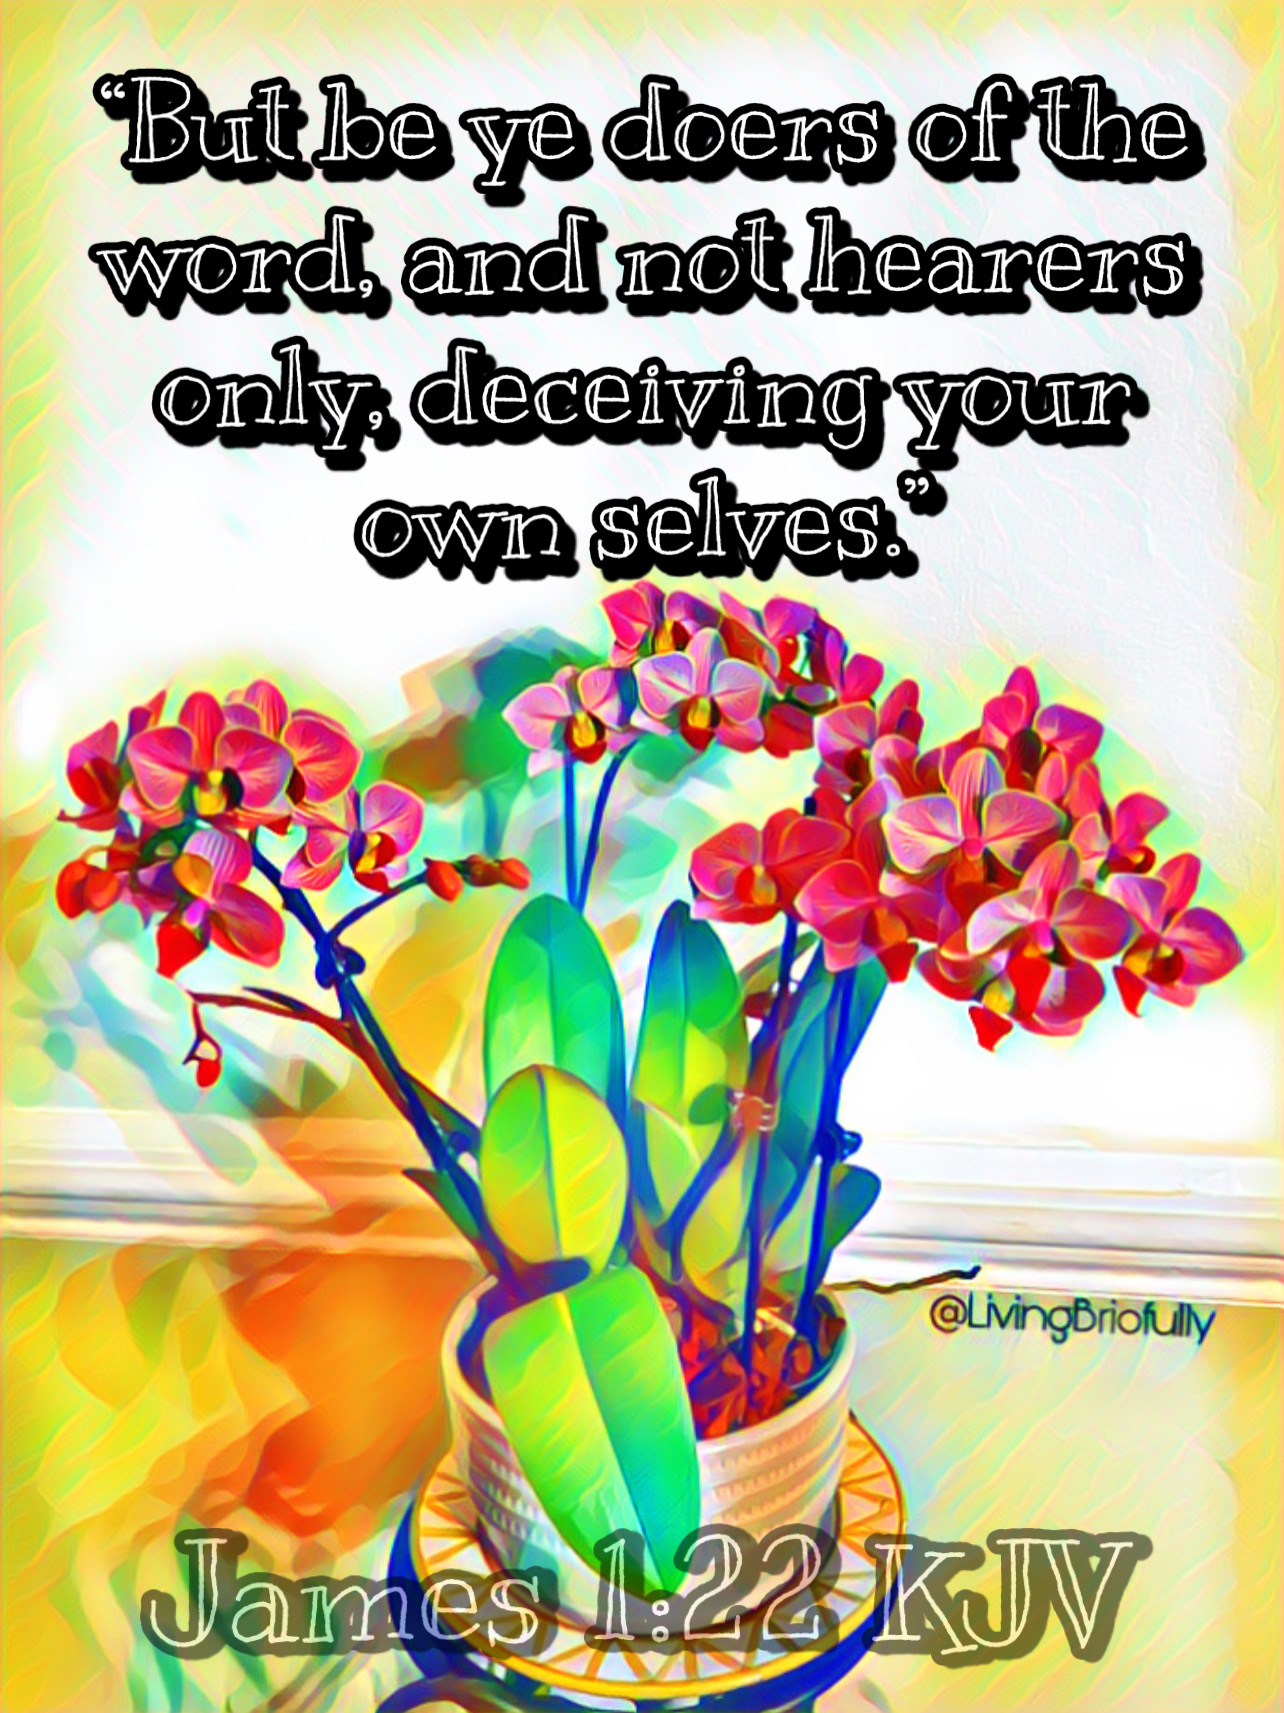 "But be ye doers of the word, and not hearers only, deceiving your own selves." James 1:22 KJV